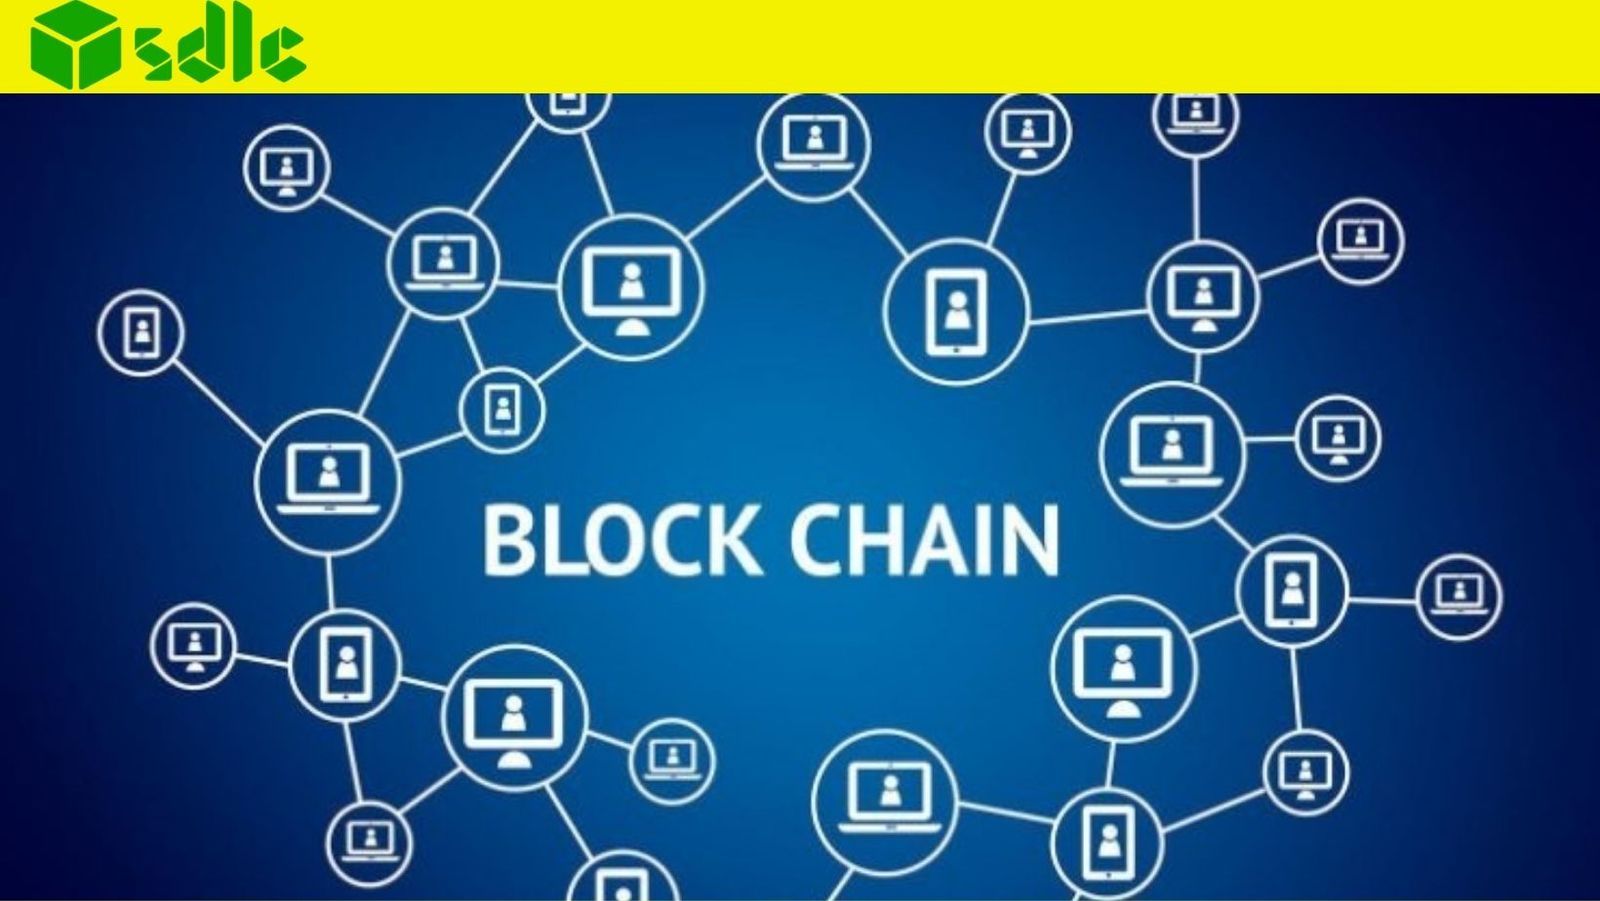 How Does Blockchain Integrate with Cloud Computing?